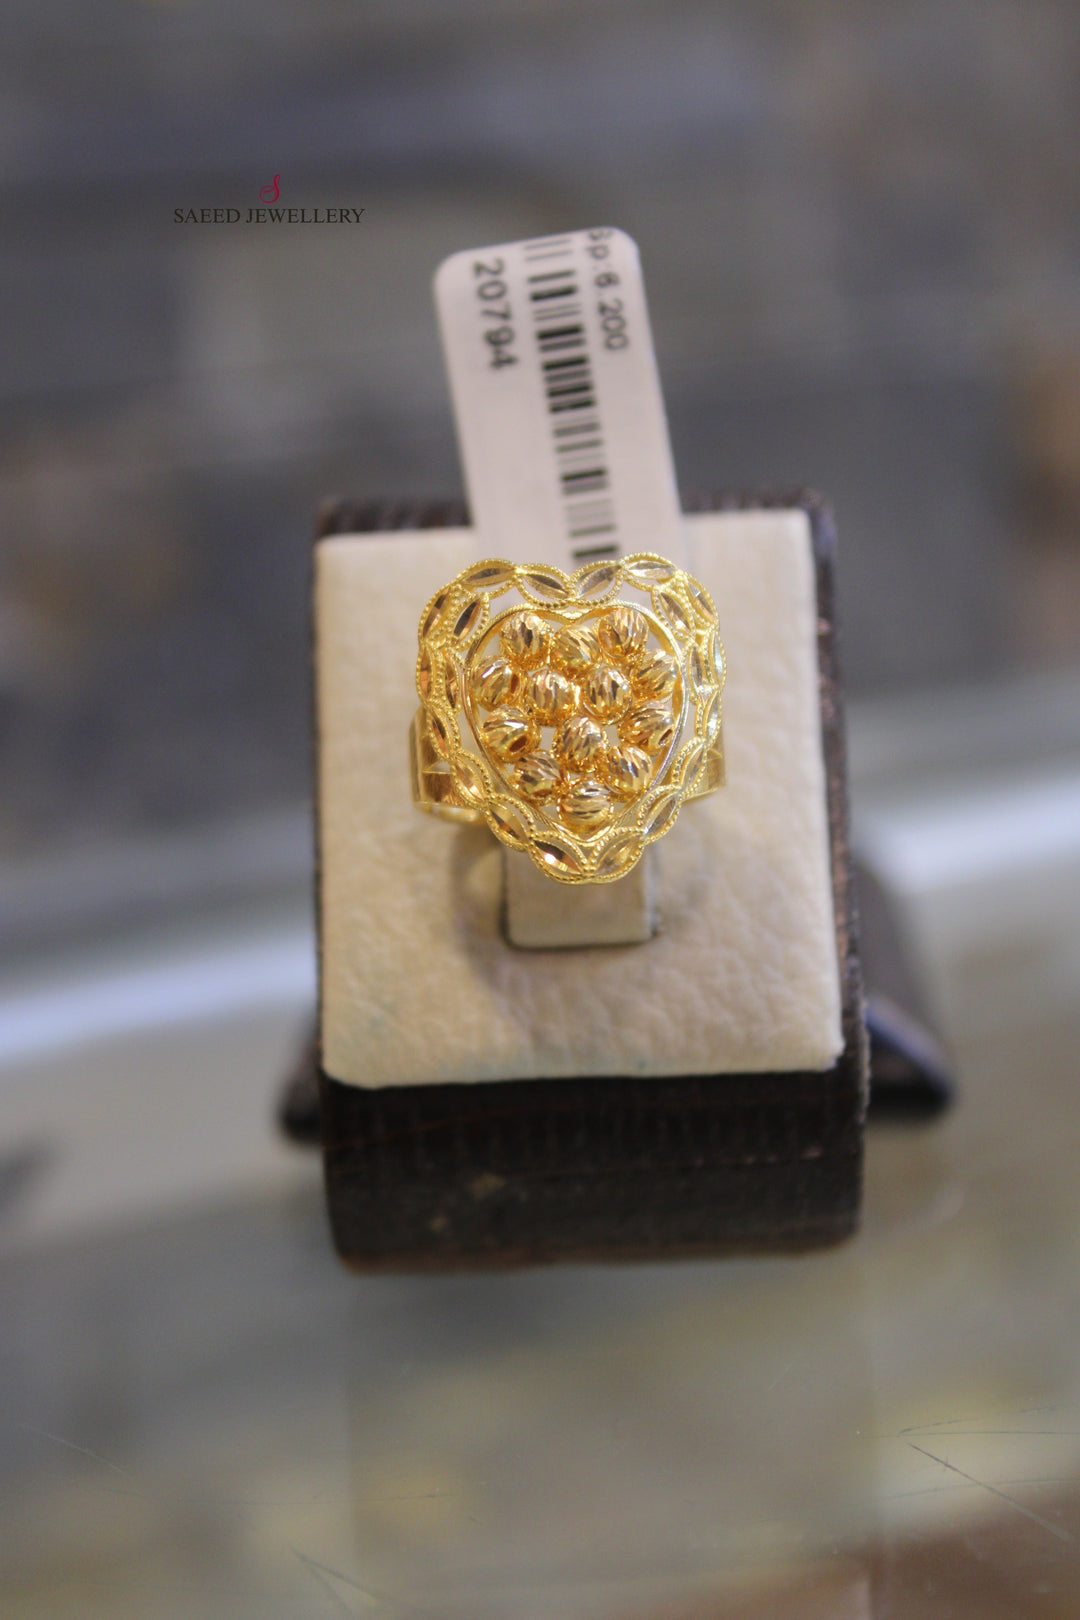 21K Gold Turkish Fancy Ring by Saeed Jewelry - Image 4